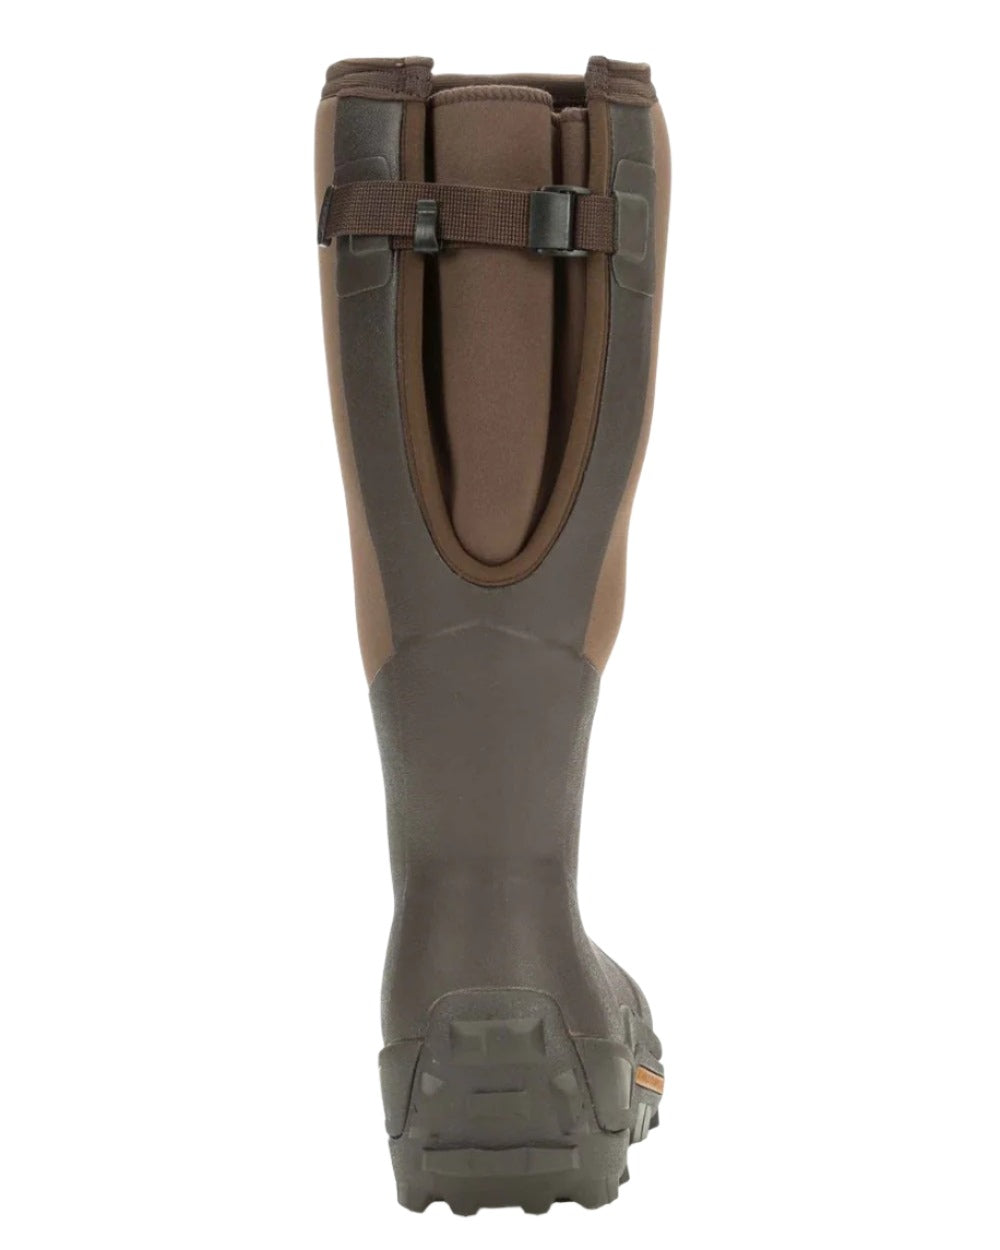 Bark Coloured Muck Boots Wetland XF Adjustable Tall Wellingtons On A White Background